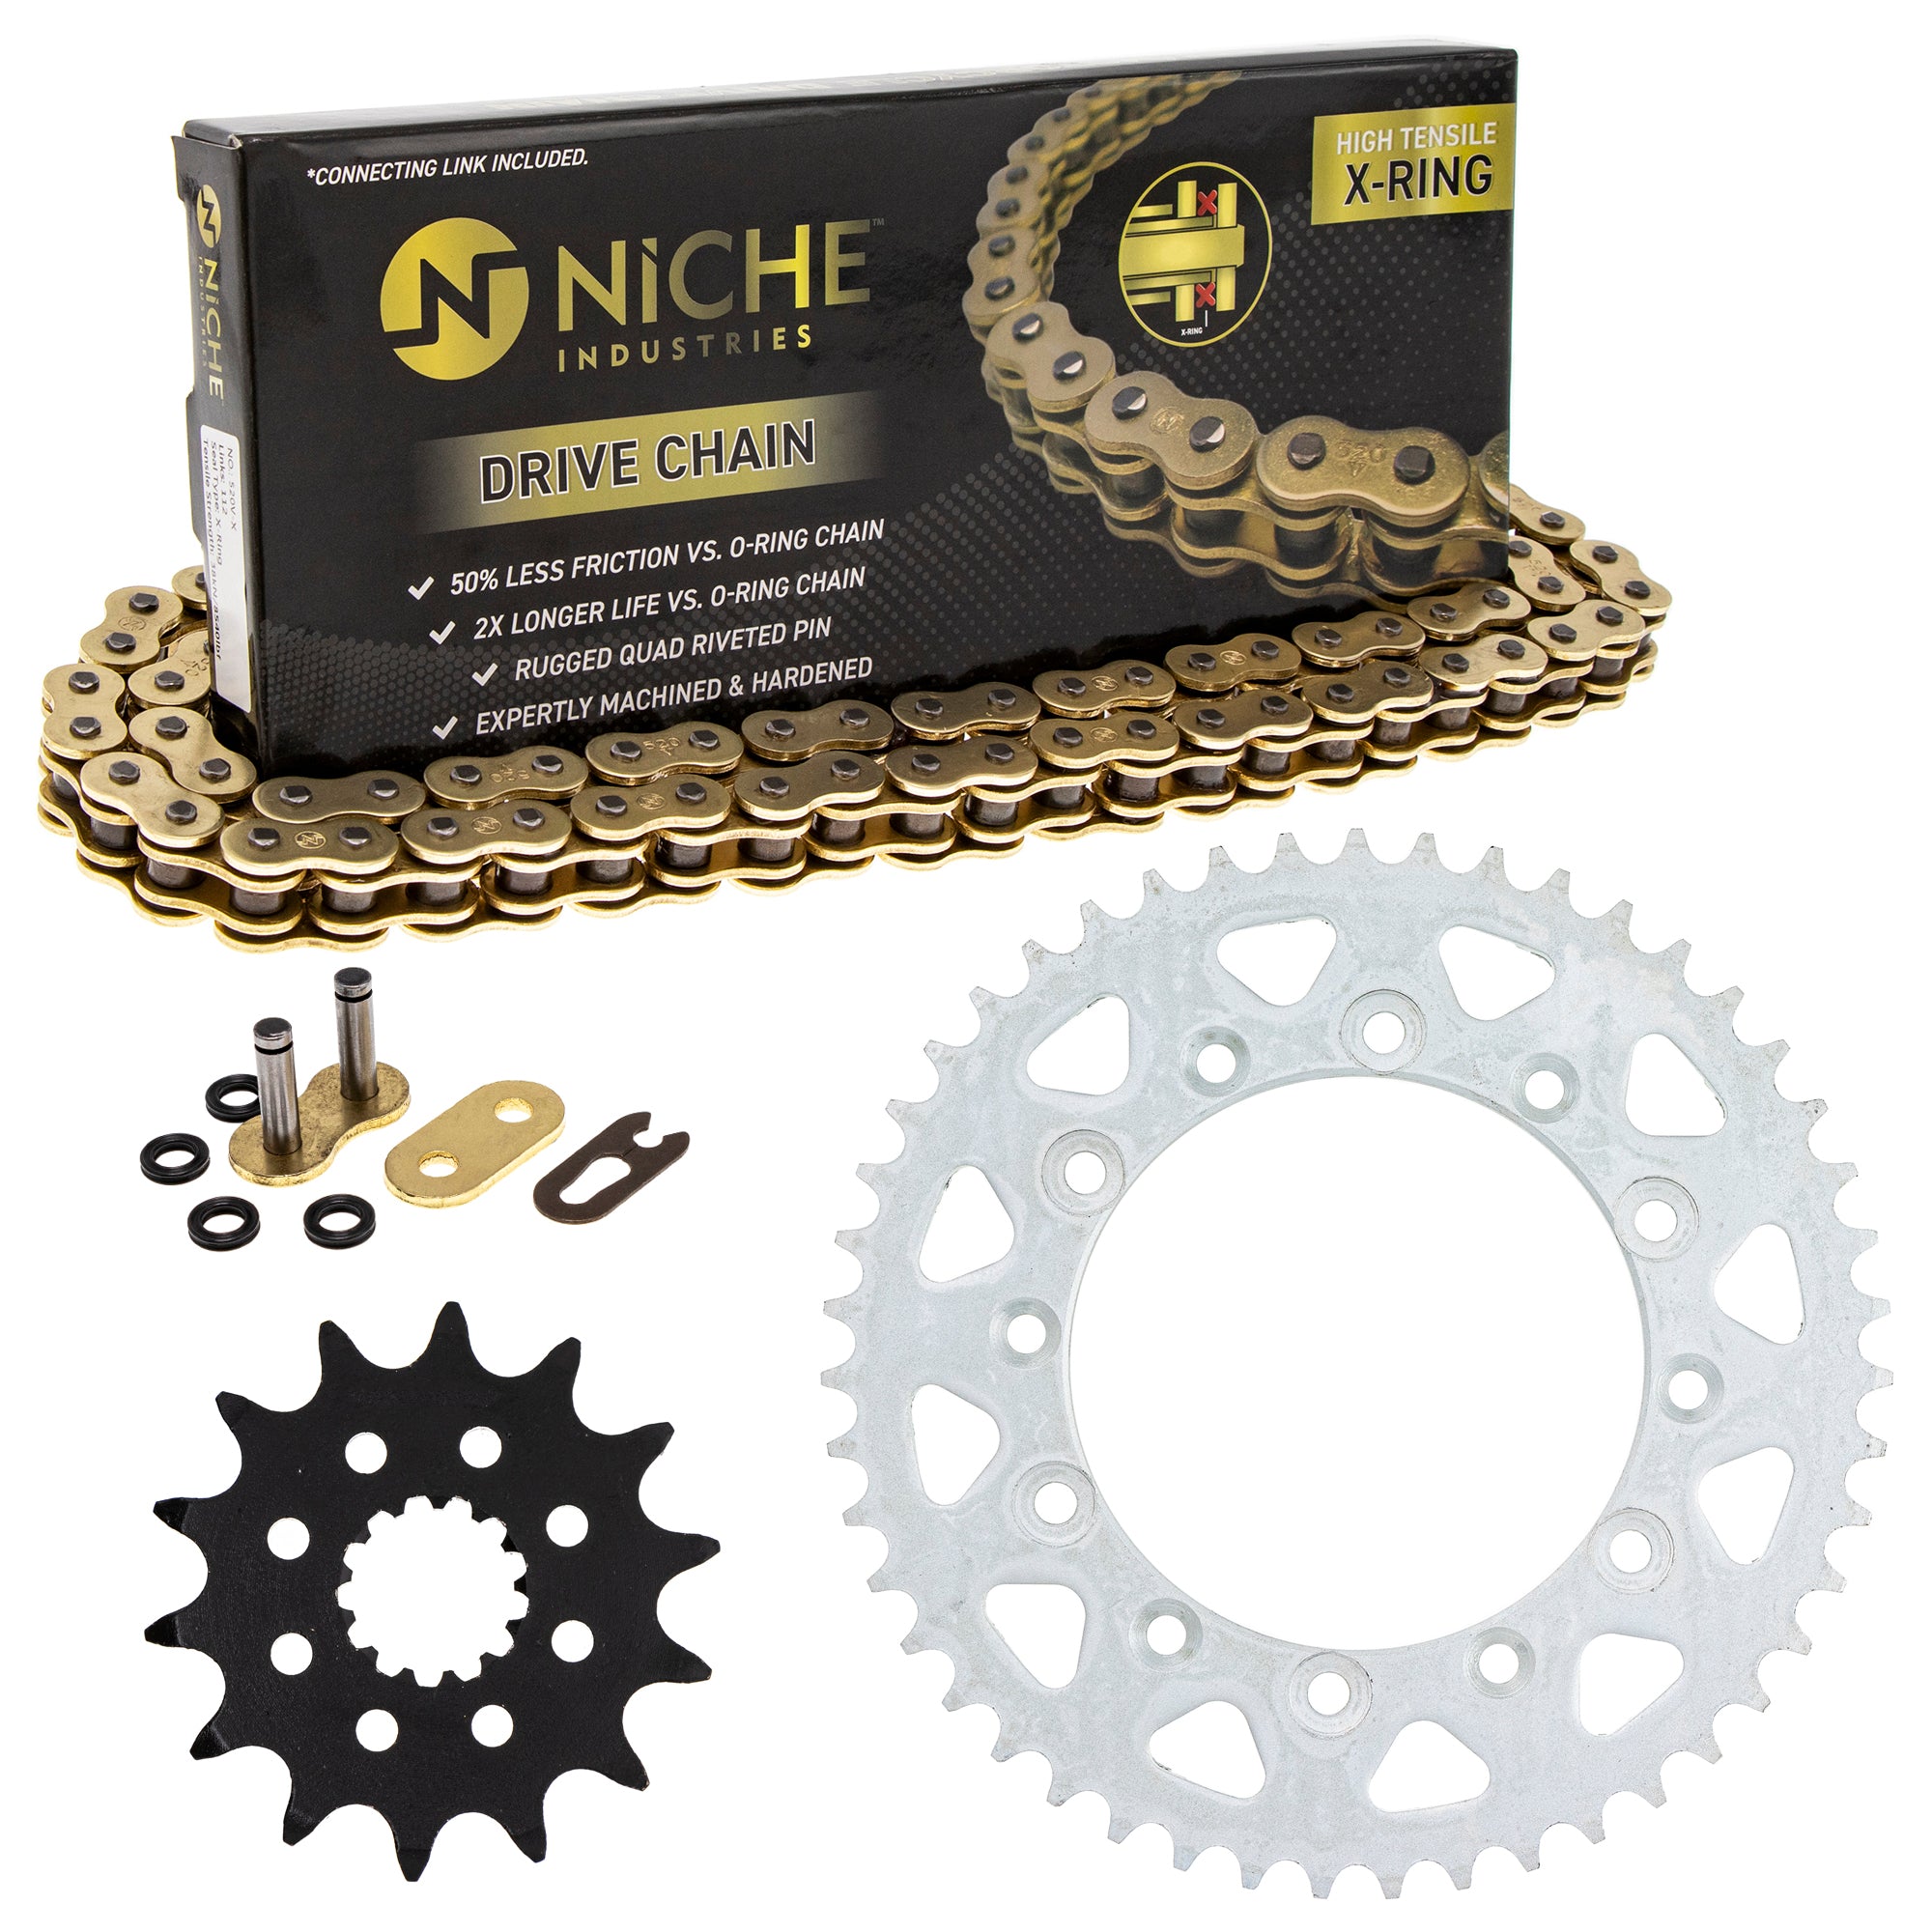 Drive Sprockets & Chain Kit for zOTHER Honda WR450F 94561-62114-00 27600-43D02-114 NICHE MK1004637